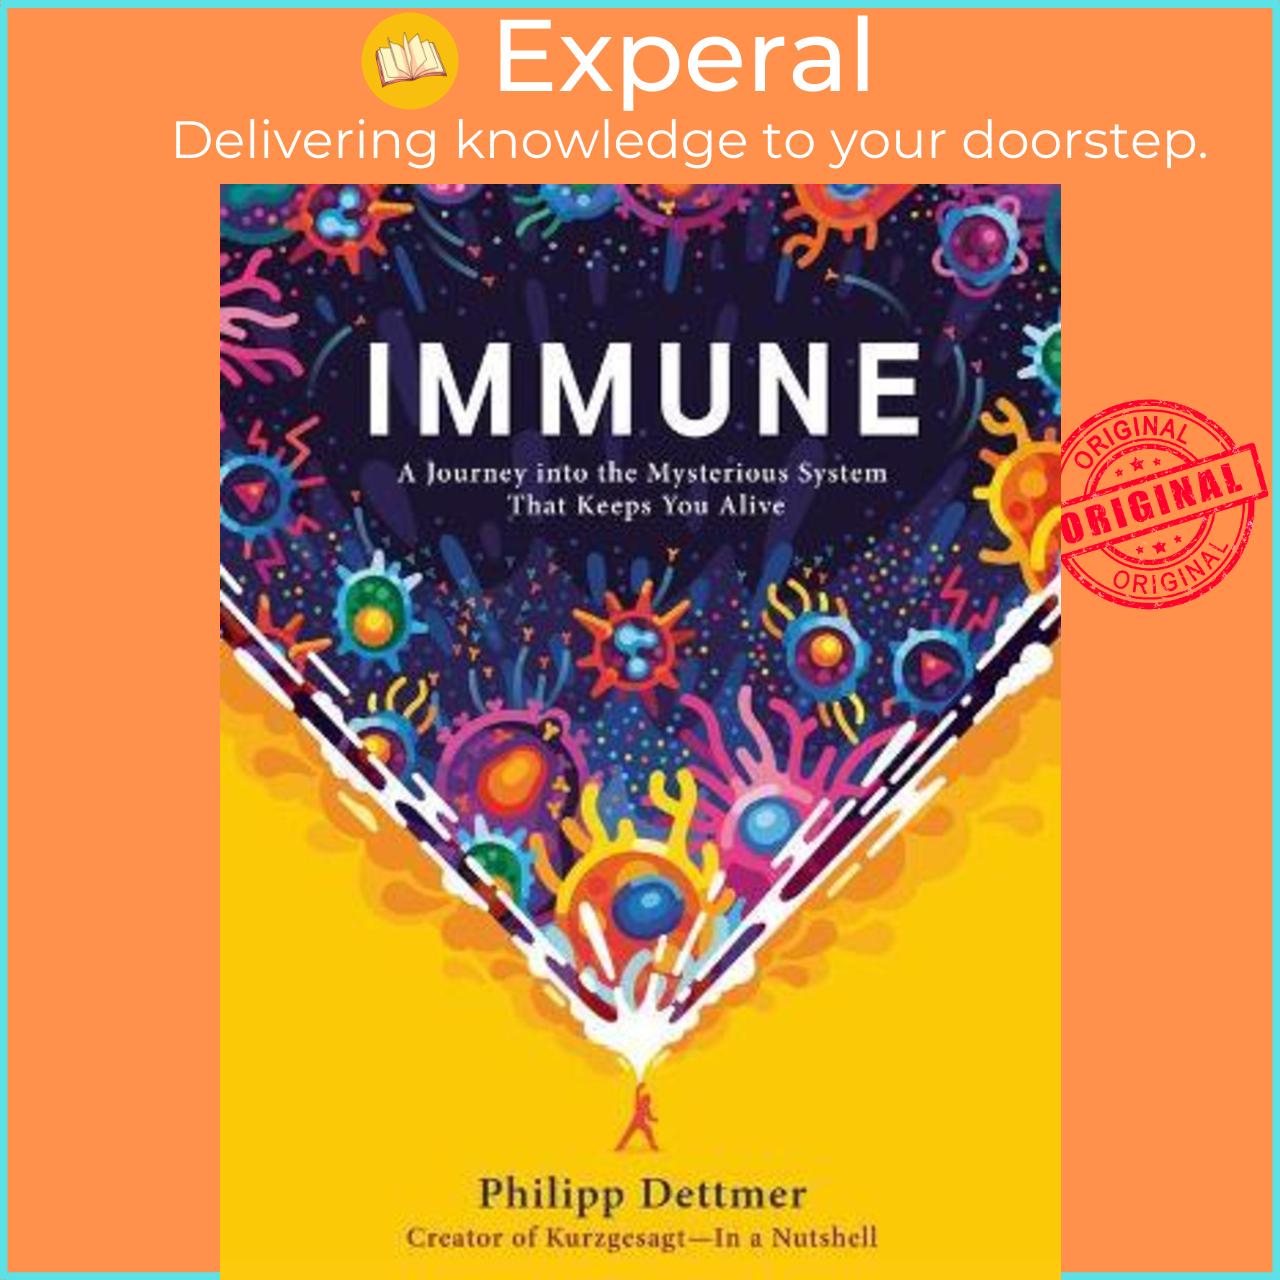 Sách - Immune : A Journey Into the Mysterious System That Keeps You Alive by Philipp Dettmer - (US Edition, hardcover)